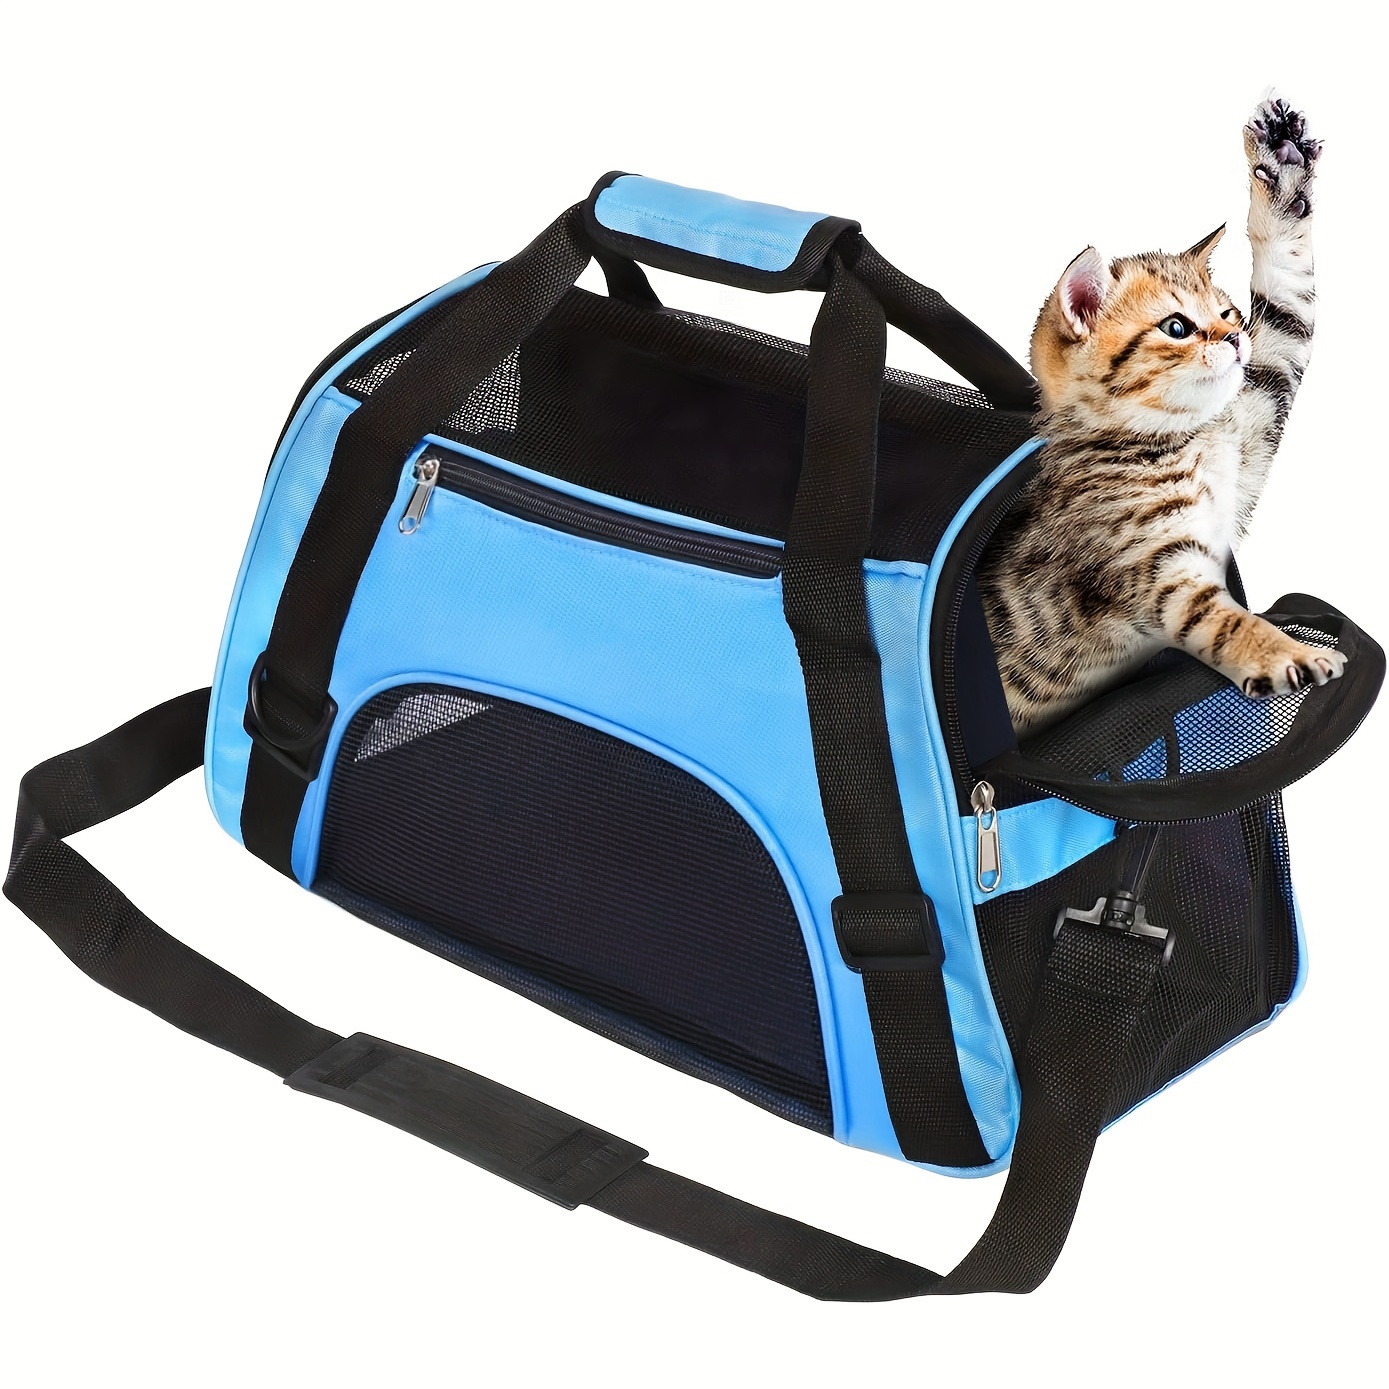 Portable Pet Bag Cat Carrier Bags Cat Outgoing Travel Breathable Pets  Handbag Cat Supplies Soft-sided Carriers with Zipper - AliExpress